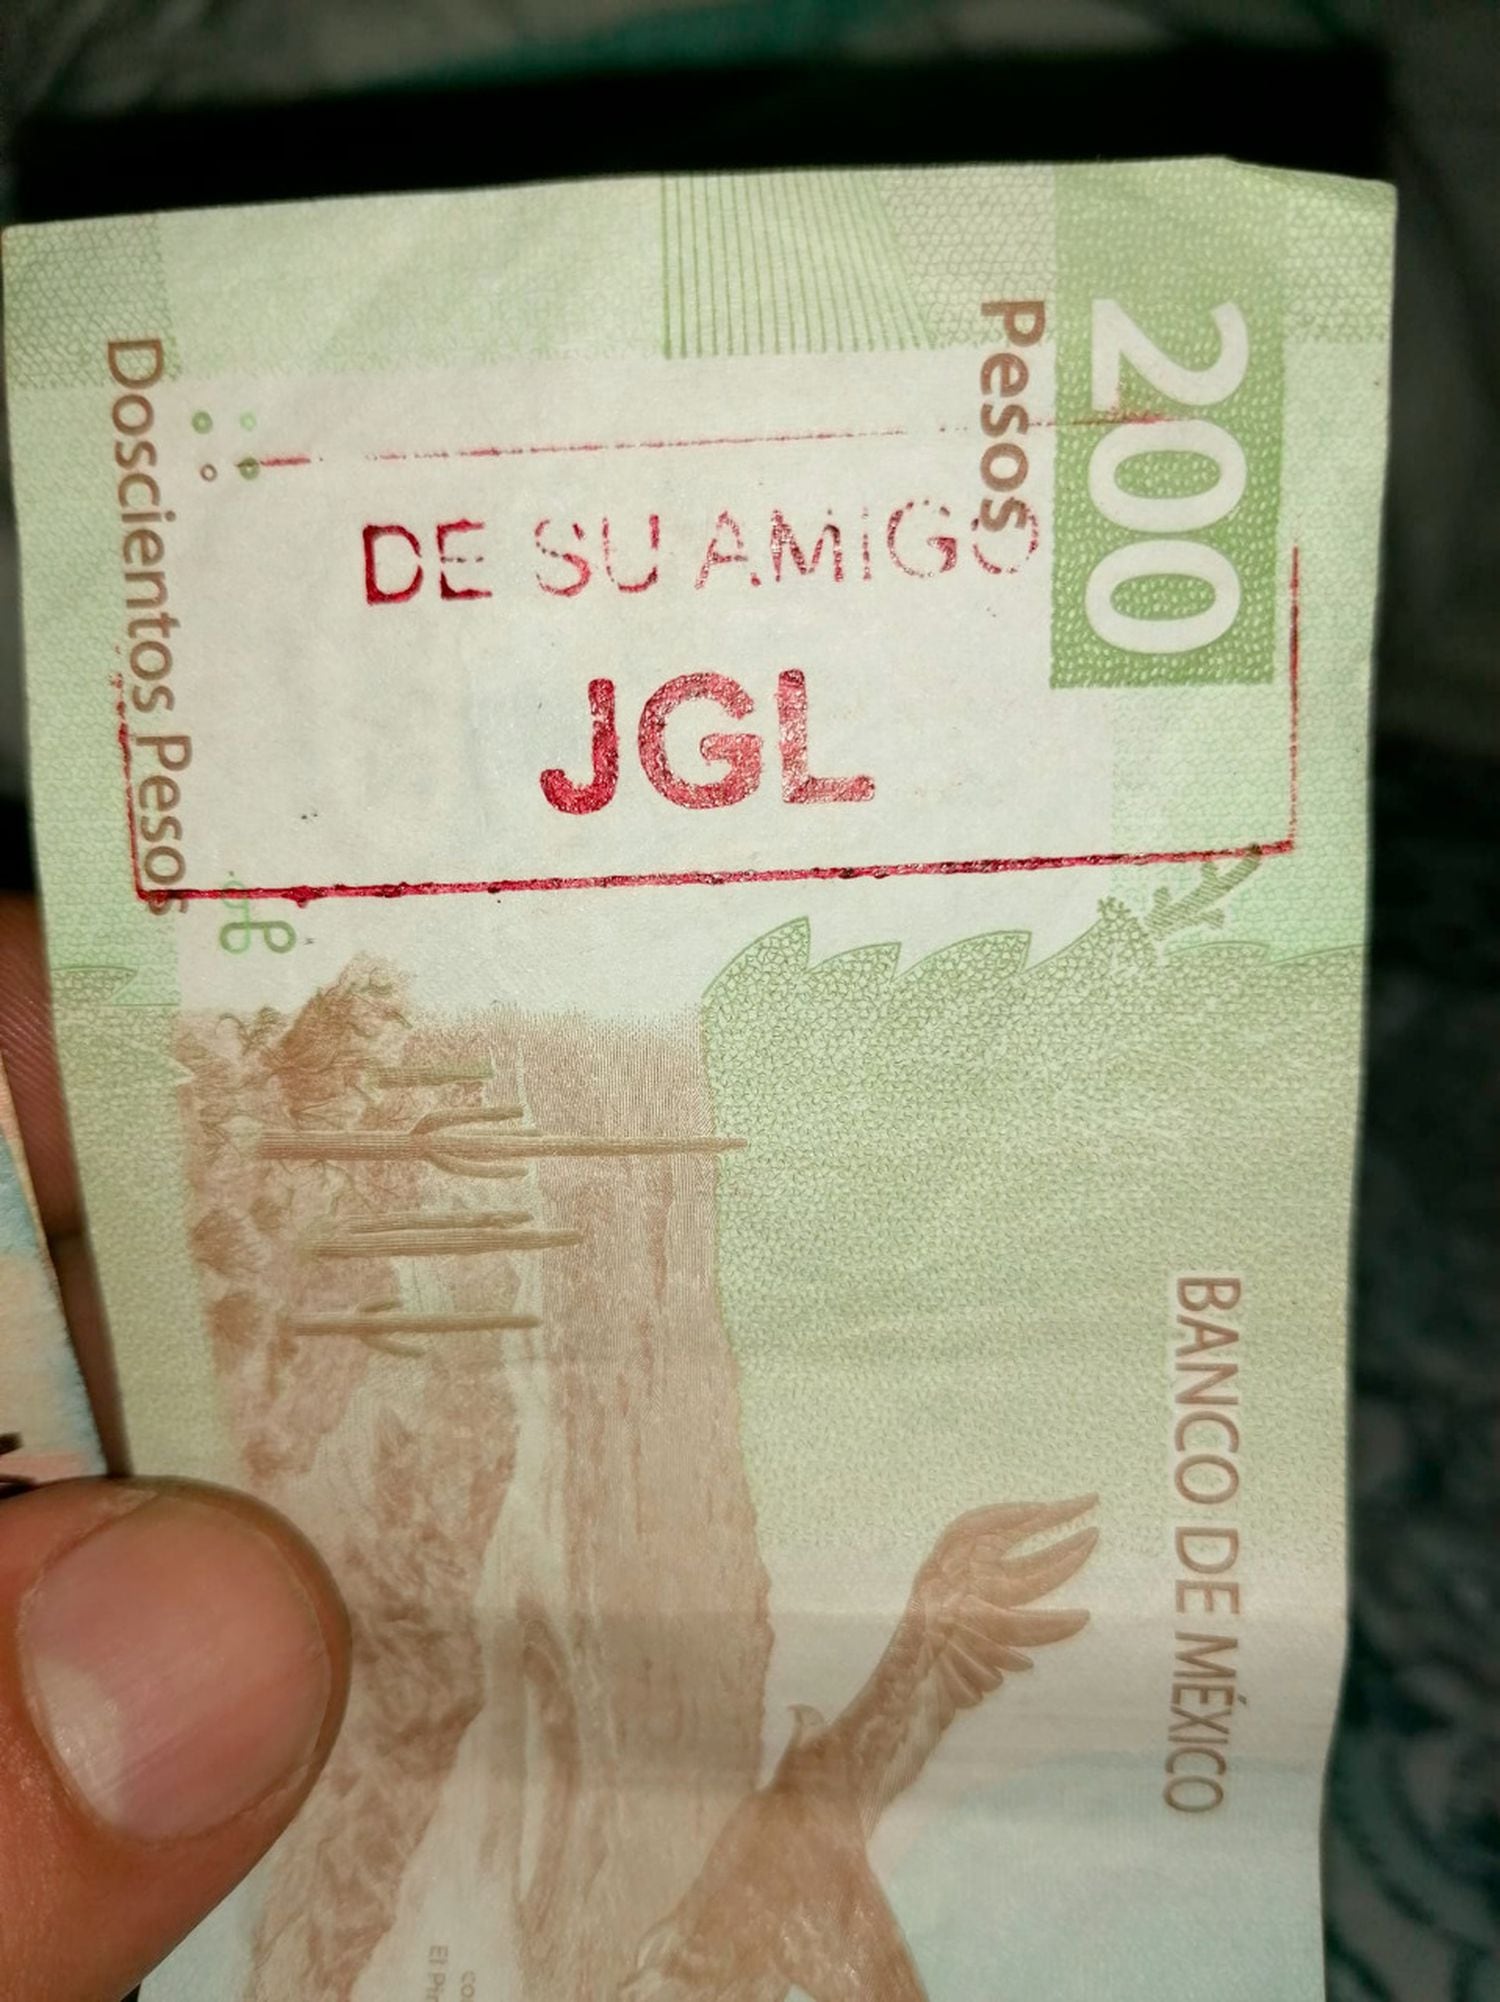 One of the photos of the shared tickets in Sinaloa.